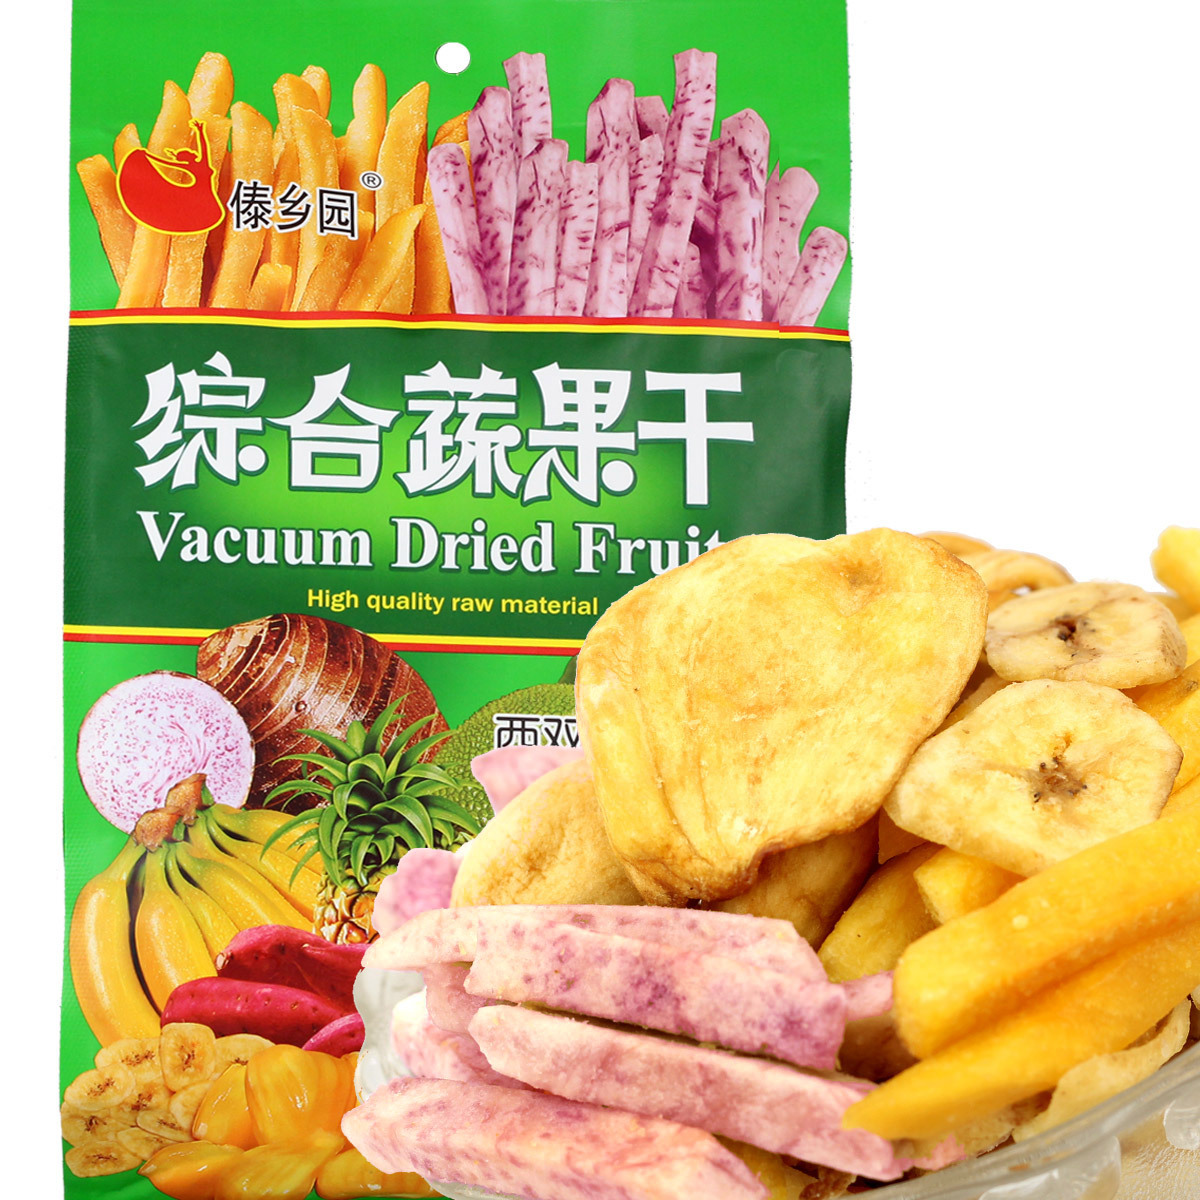 Dry fruits and vegetables dried fruit dry fruits and vegetables tarns jackfruit sweet potato bar 200g